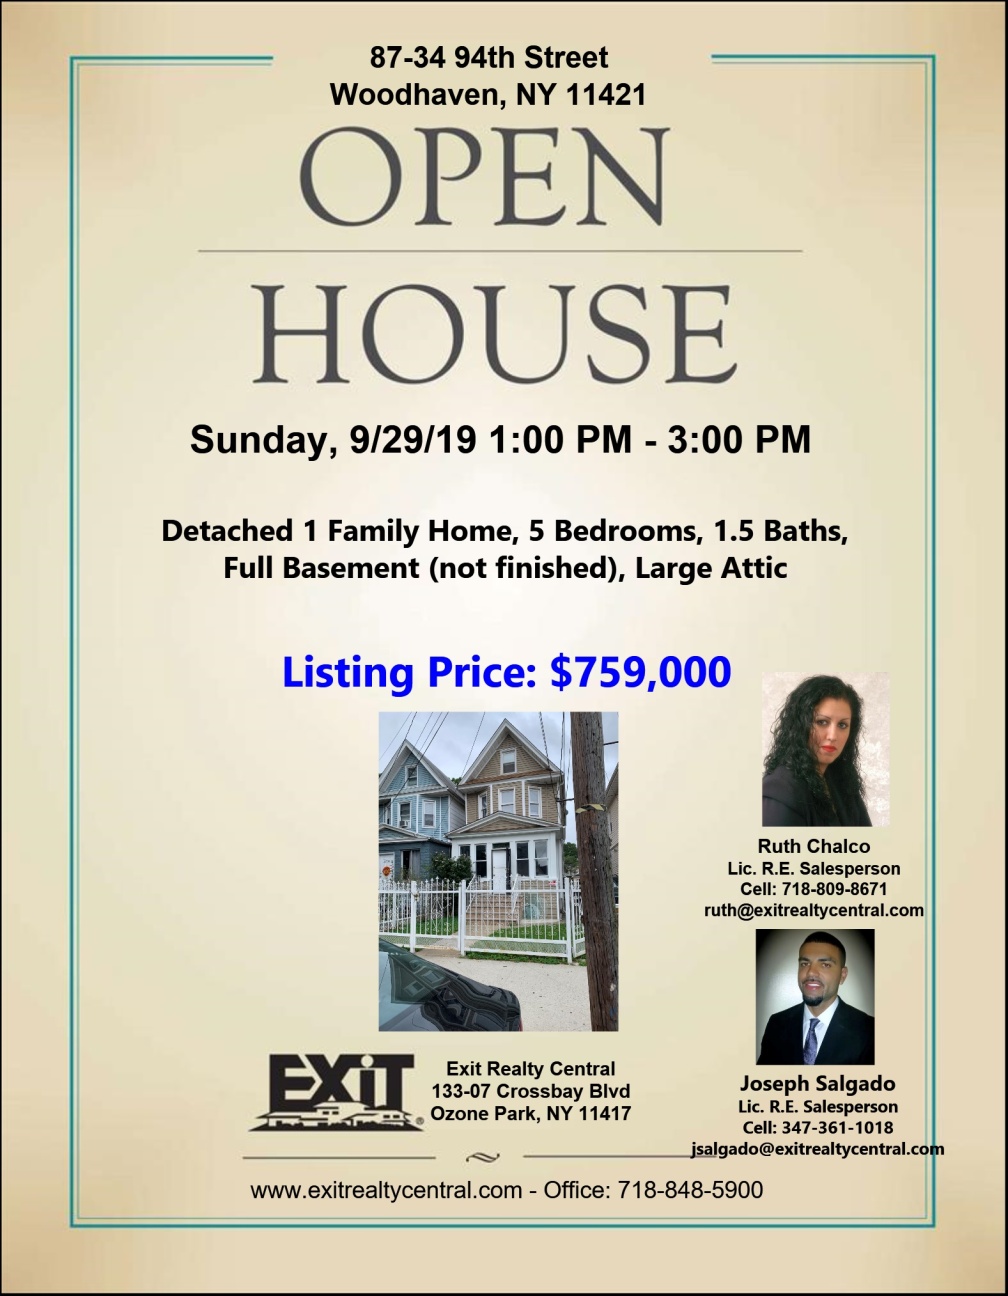 Open House in Woodhaven Sunday, 9/29 1-3pm